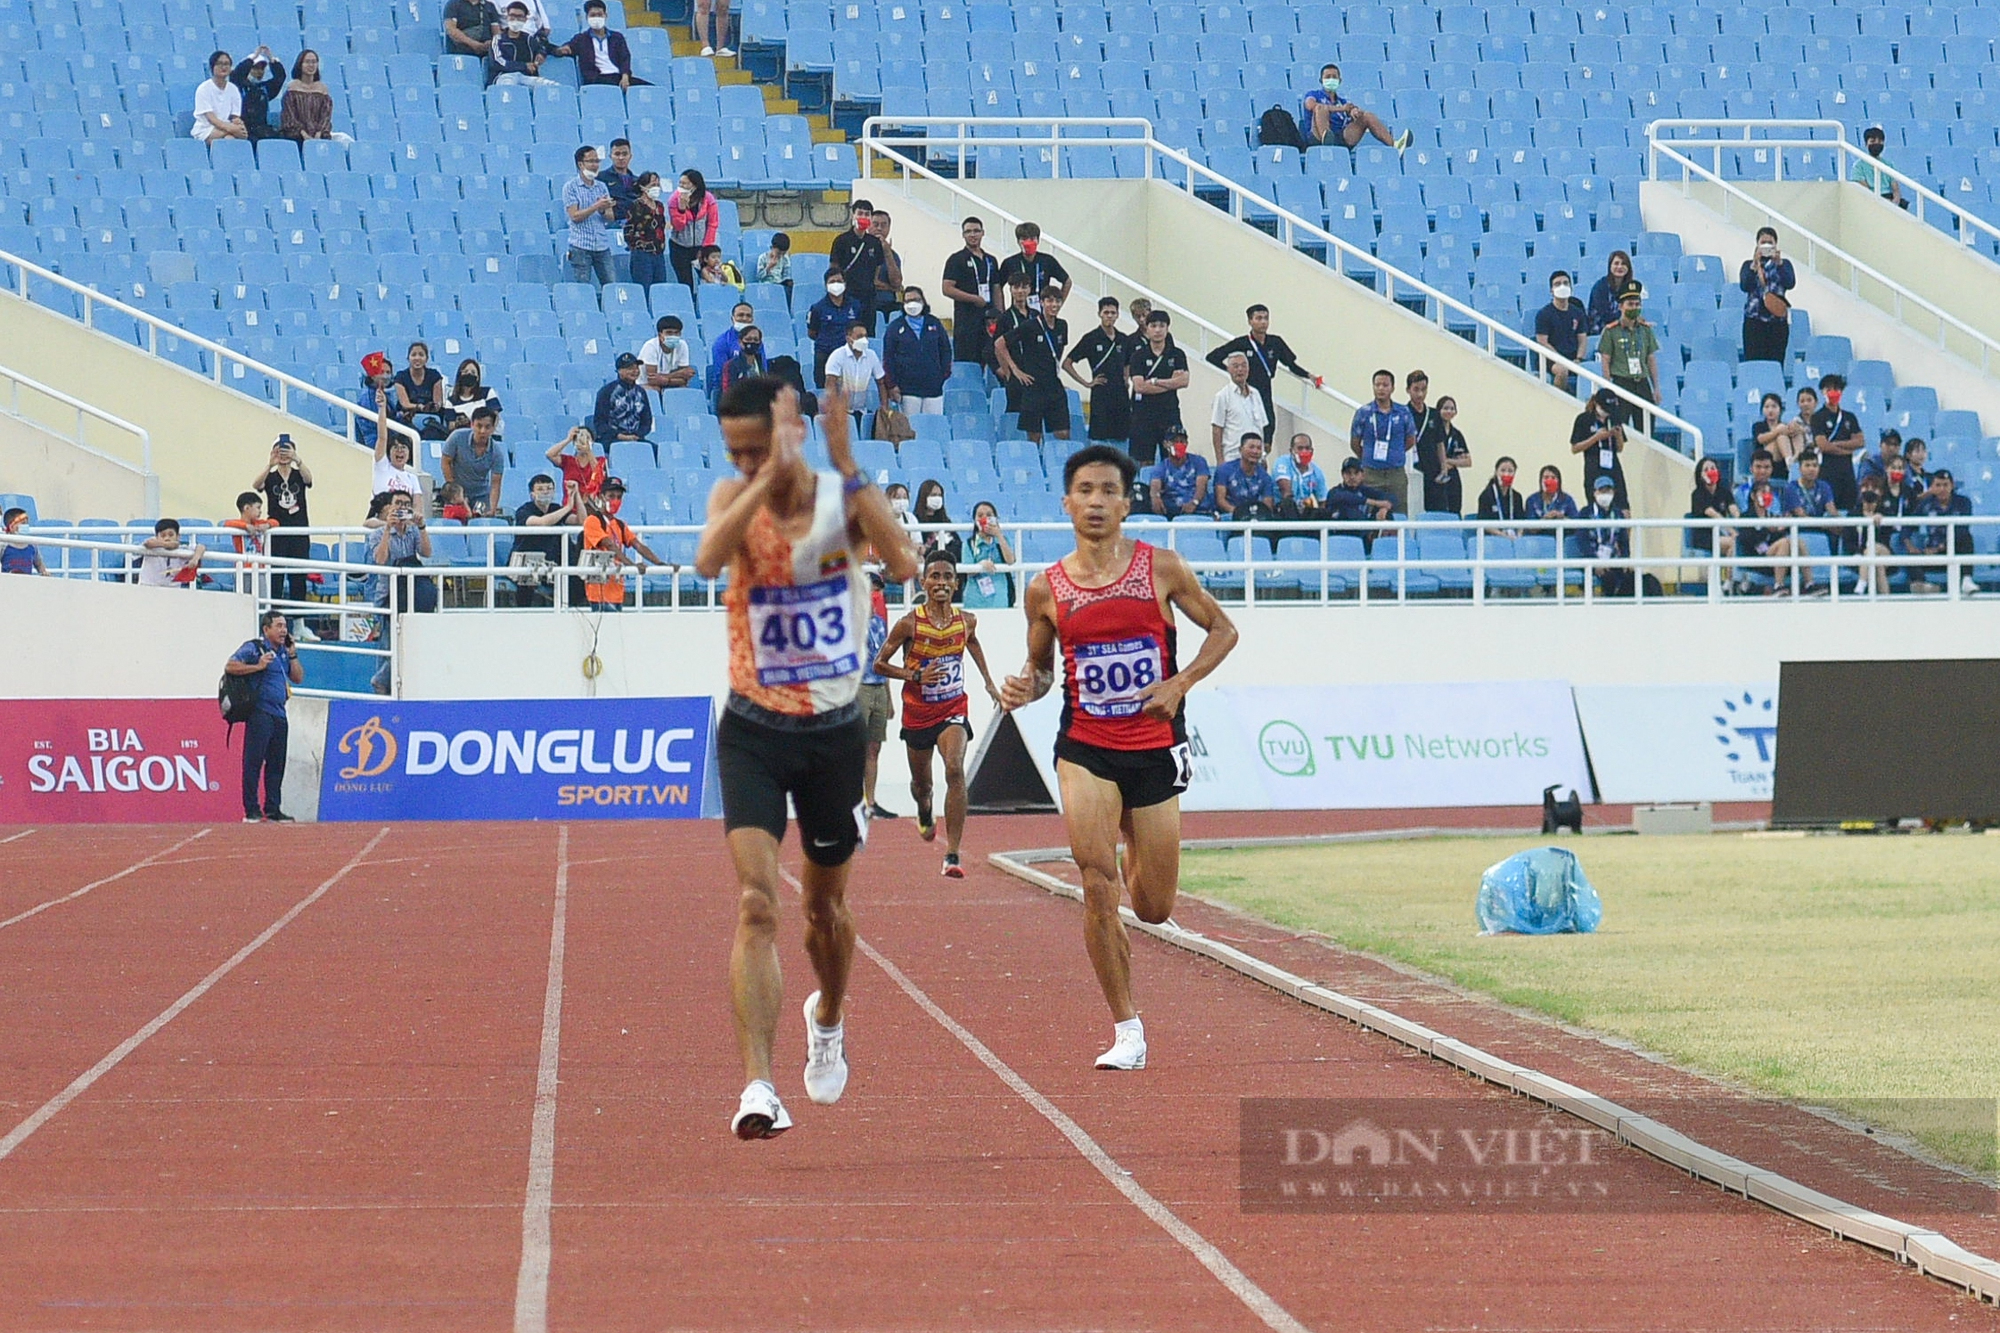 At the age of 36, Nguyen Van Lai scored a double gold medal in the toughest events in athletics - Photo 6.